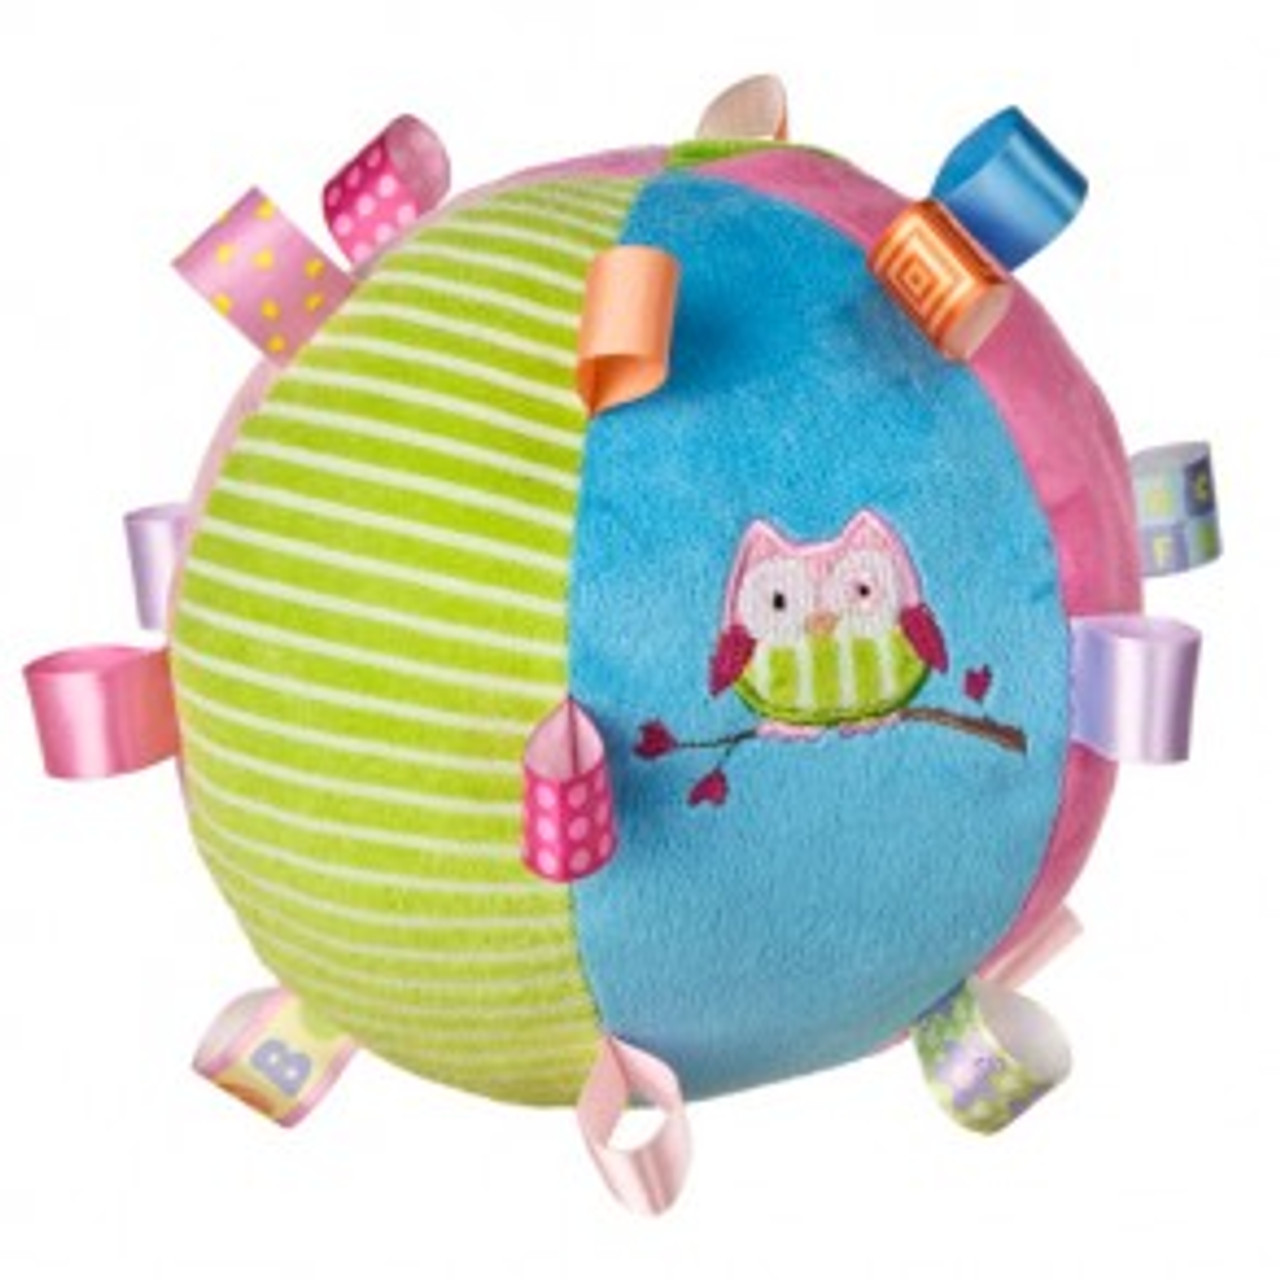 Oodles Owl Chime Ball